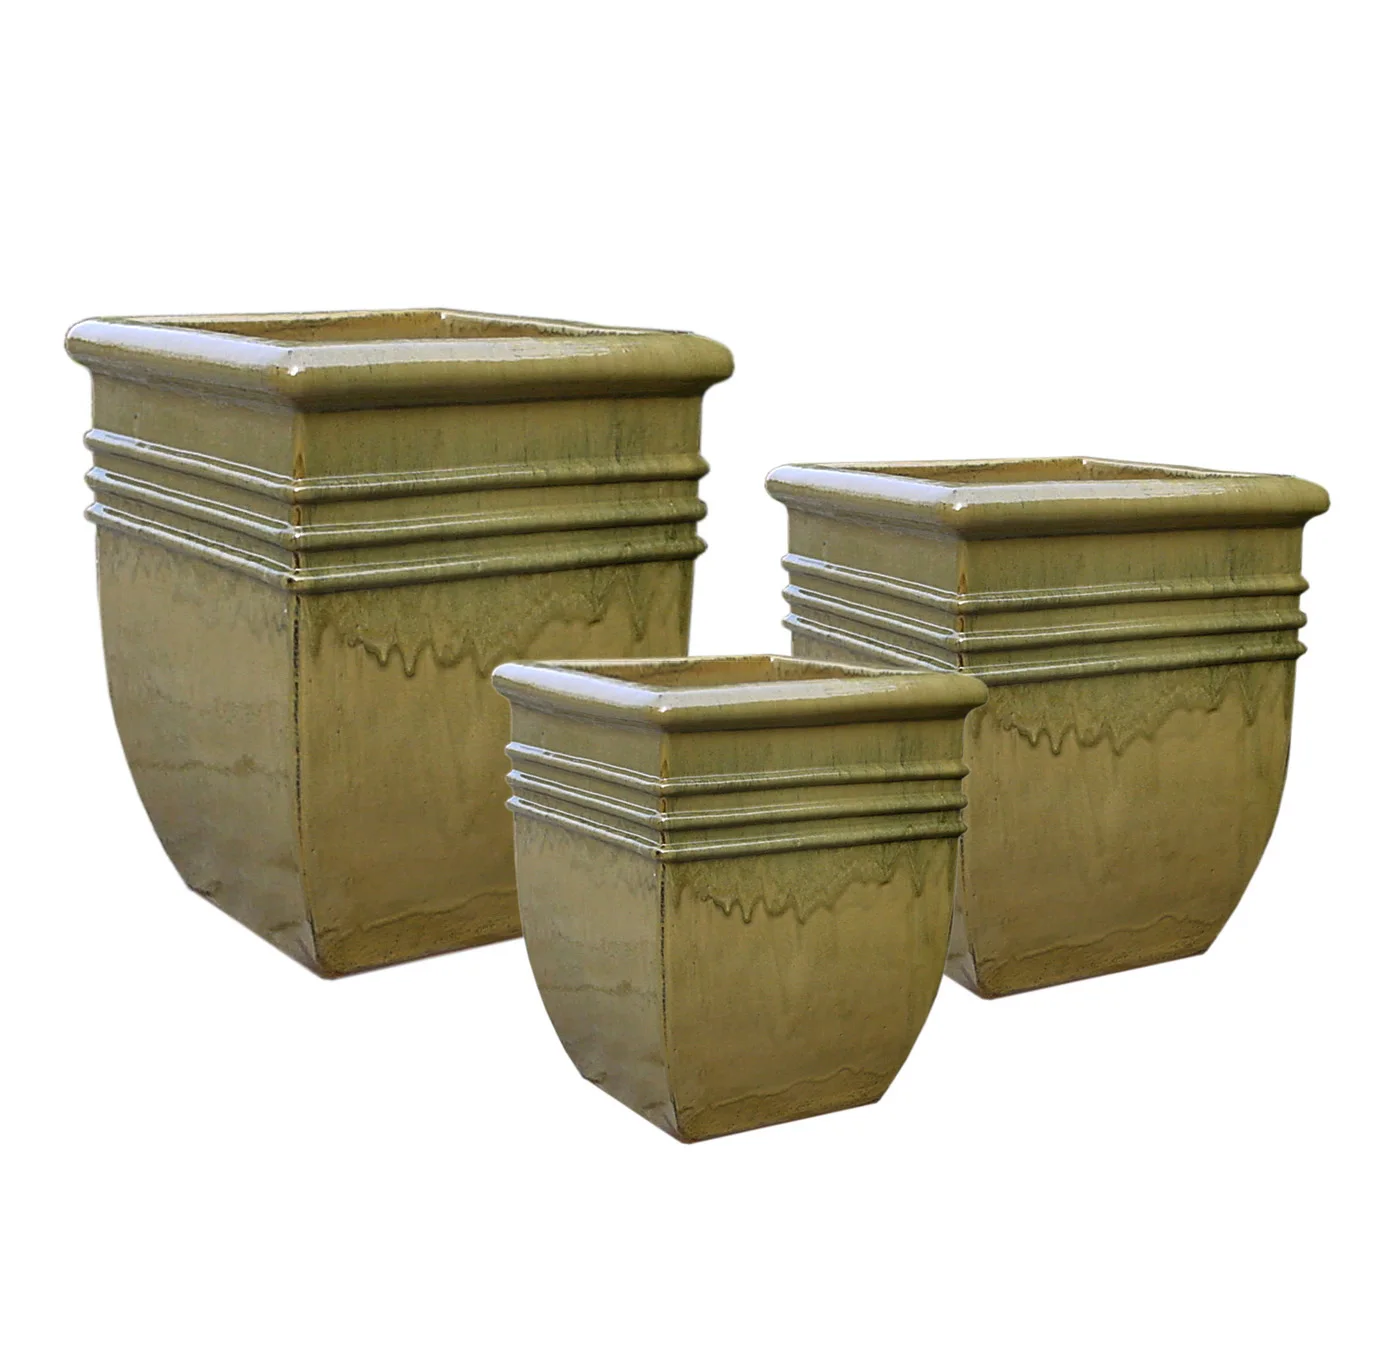 European-Style Terracotta Glazed Ceramic Planter Floor-Based Clay Pots for Outdoor Flower Planting for Home and Nursery Garden